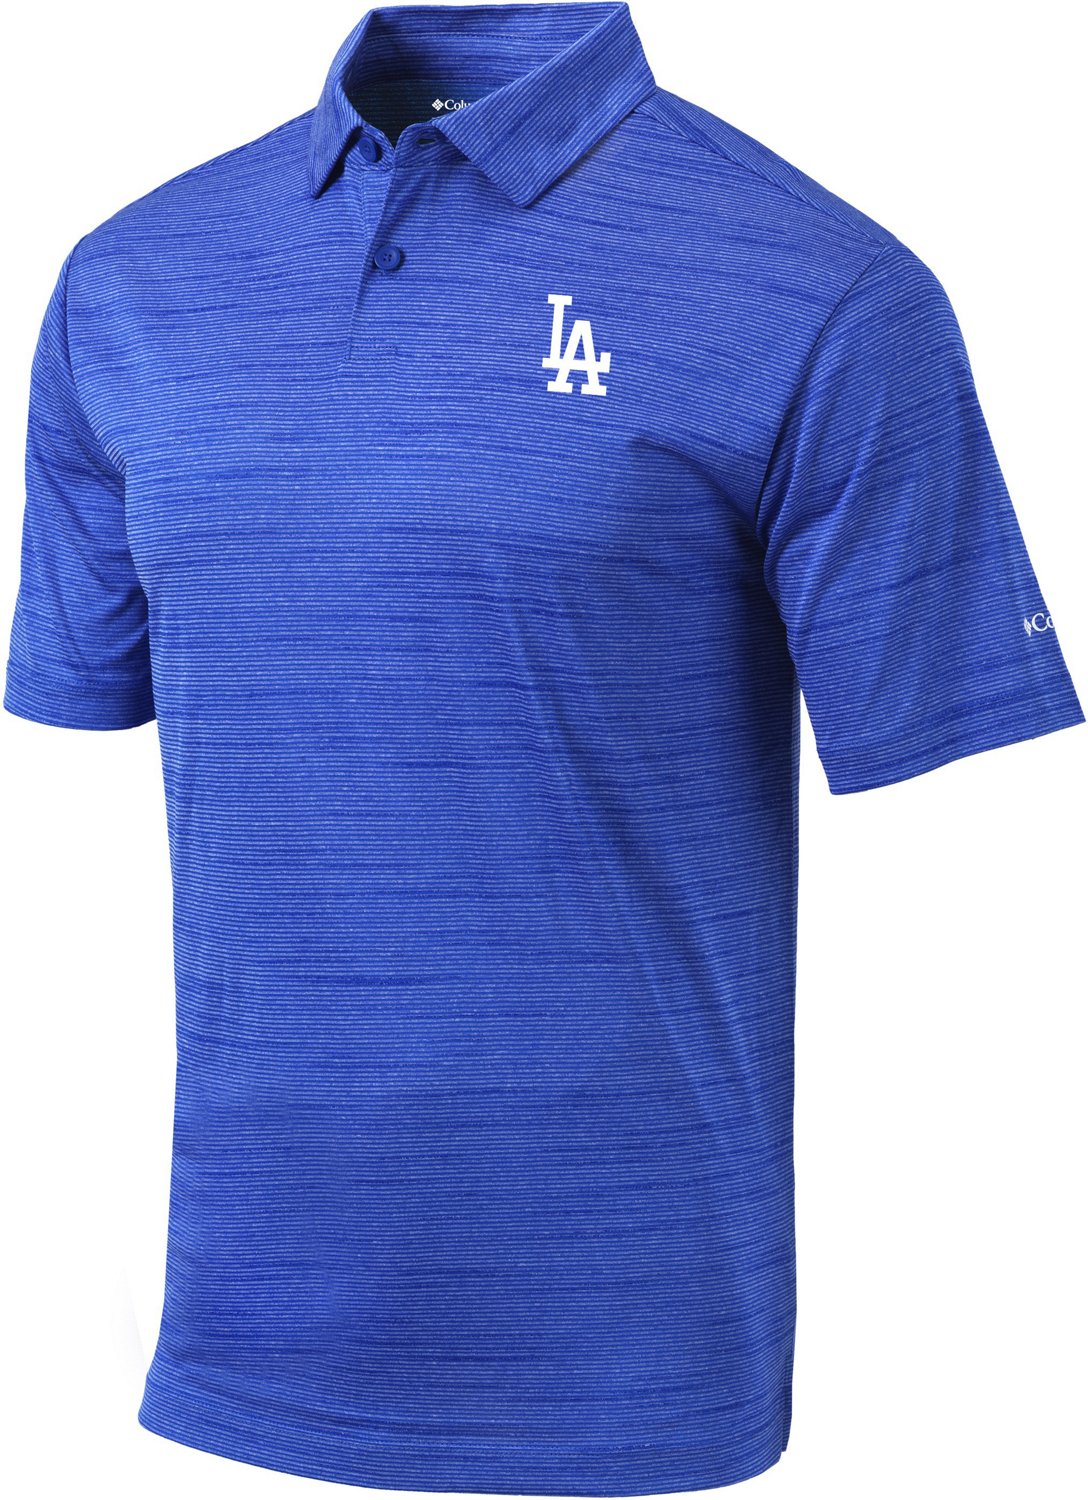 Dodgers Polo Nike Shirt Size XL Dry Fit